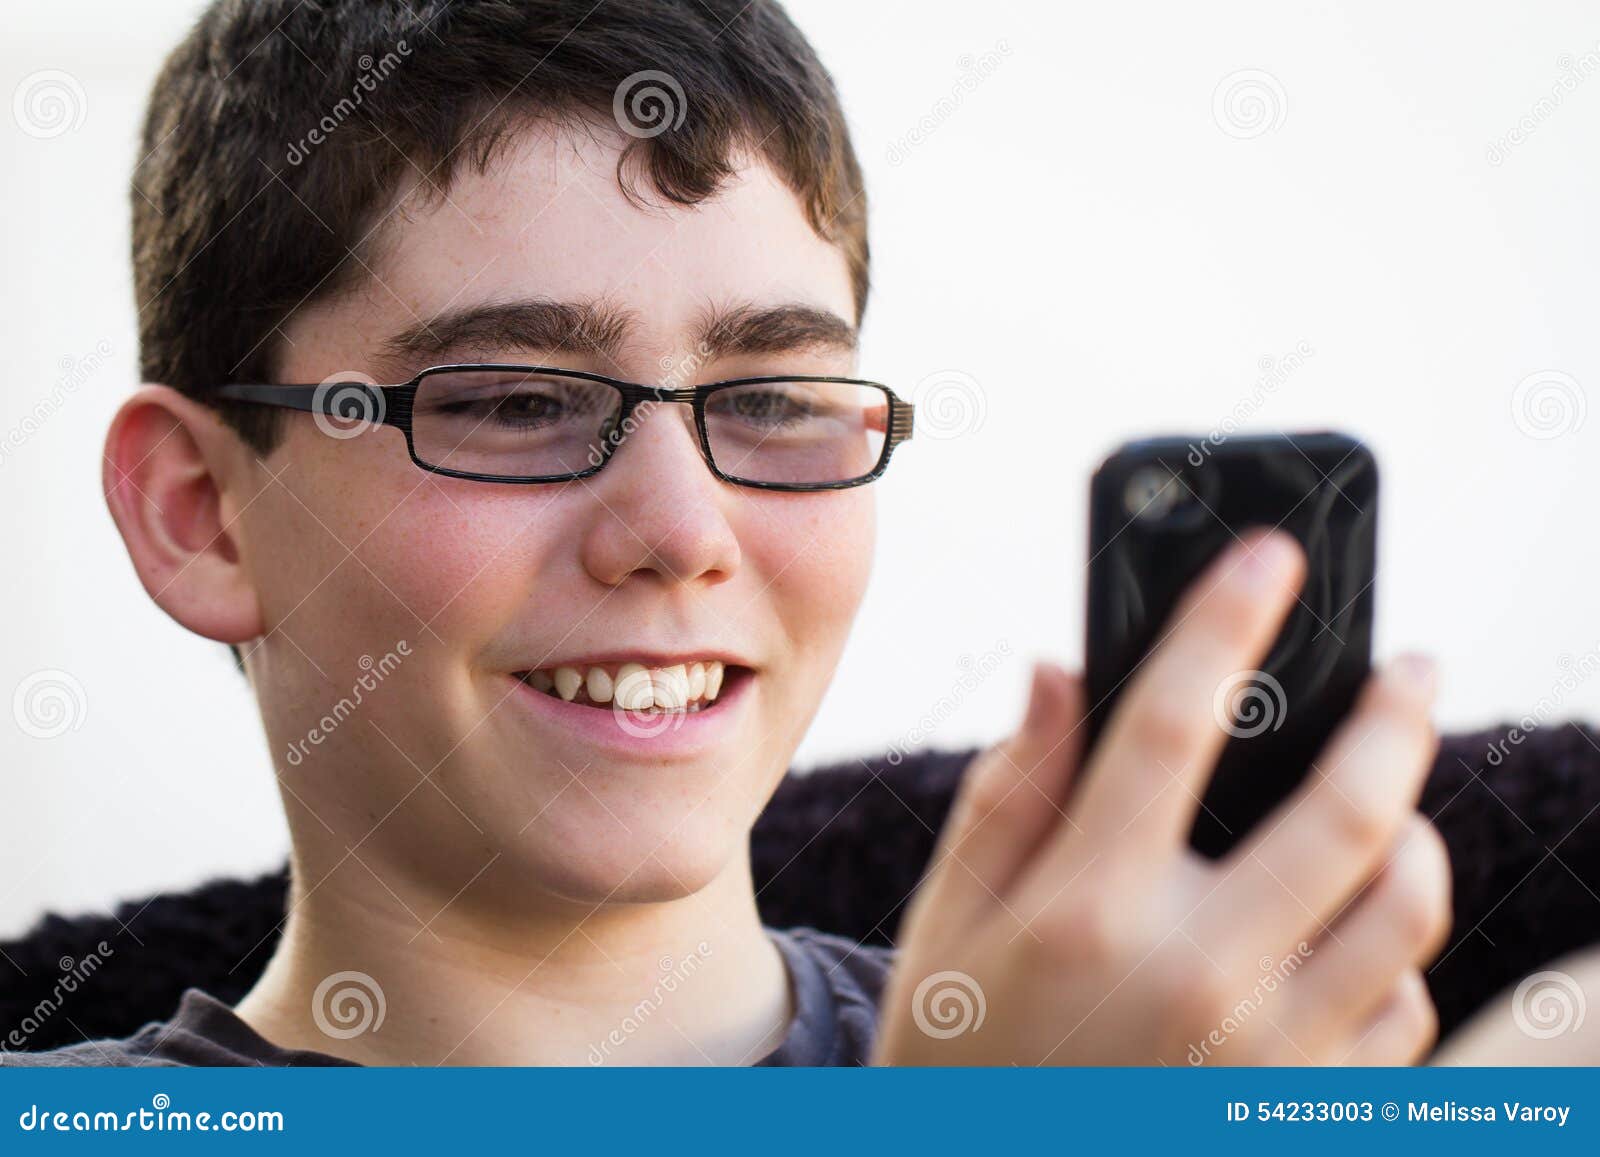 Handsome Teen Using His Smartphone Stock Image - Image of mobile, kids ...